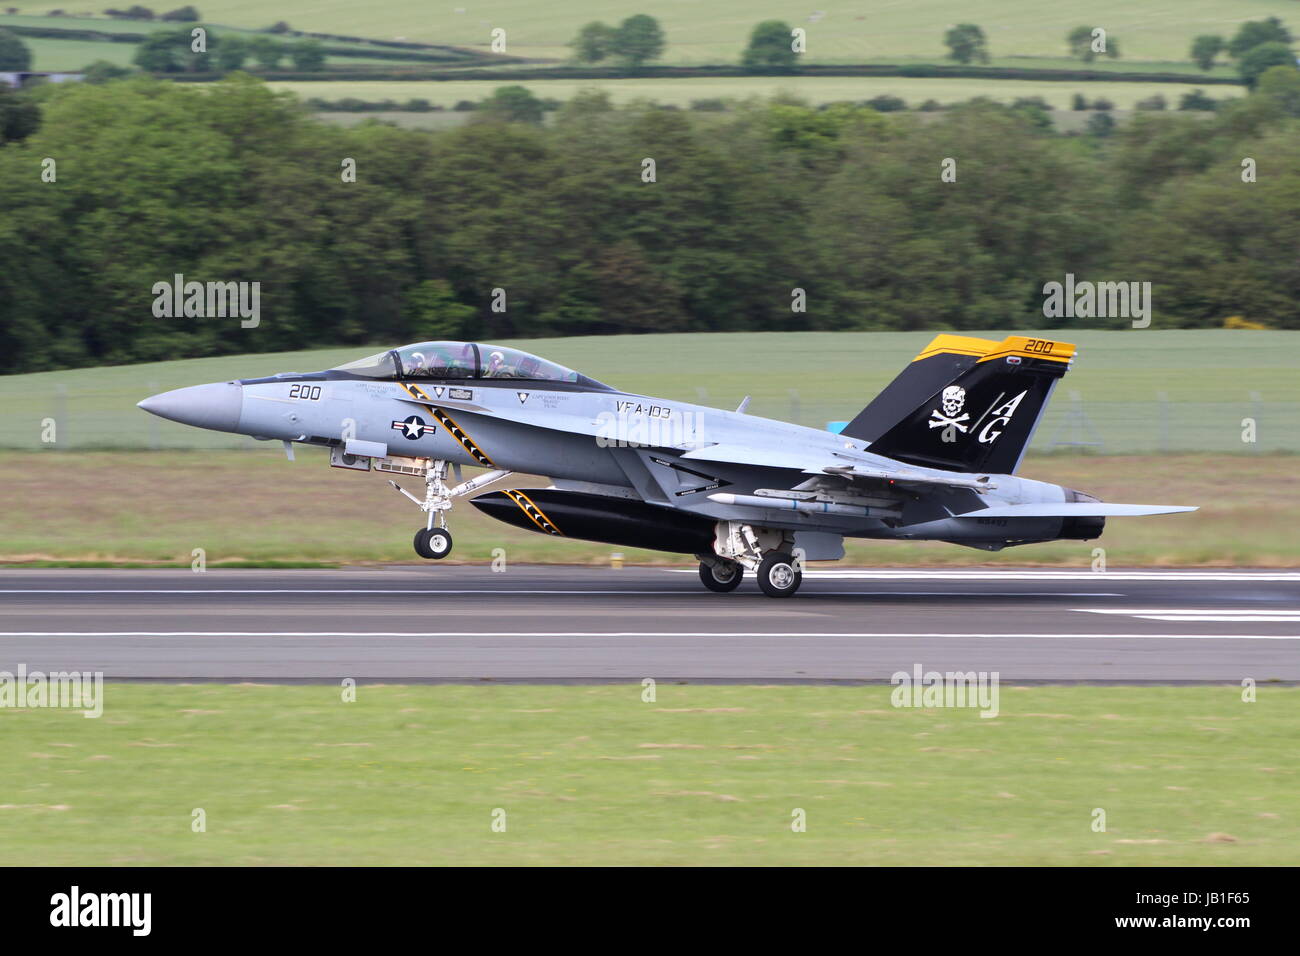 168493, a Boeing F/A-18F Super Hornet, operated by VFA-103 "Jolly Rogers" of the United States Navy, arriving at Prestwick Airport in Ayrshire. Stock Photo